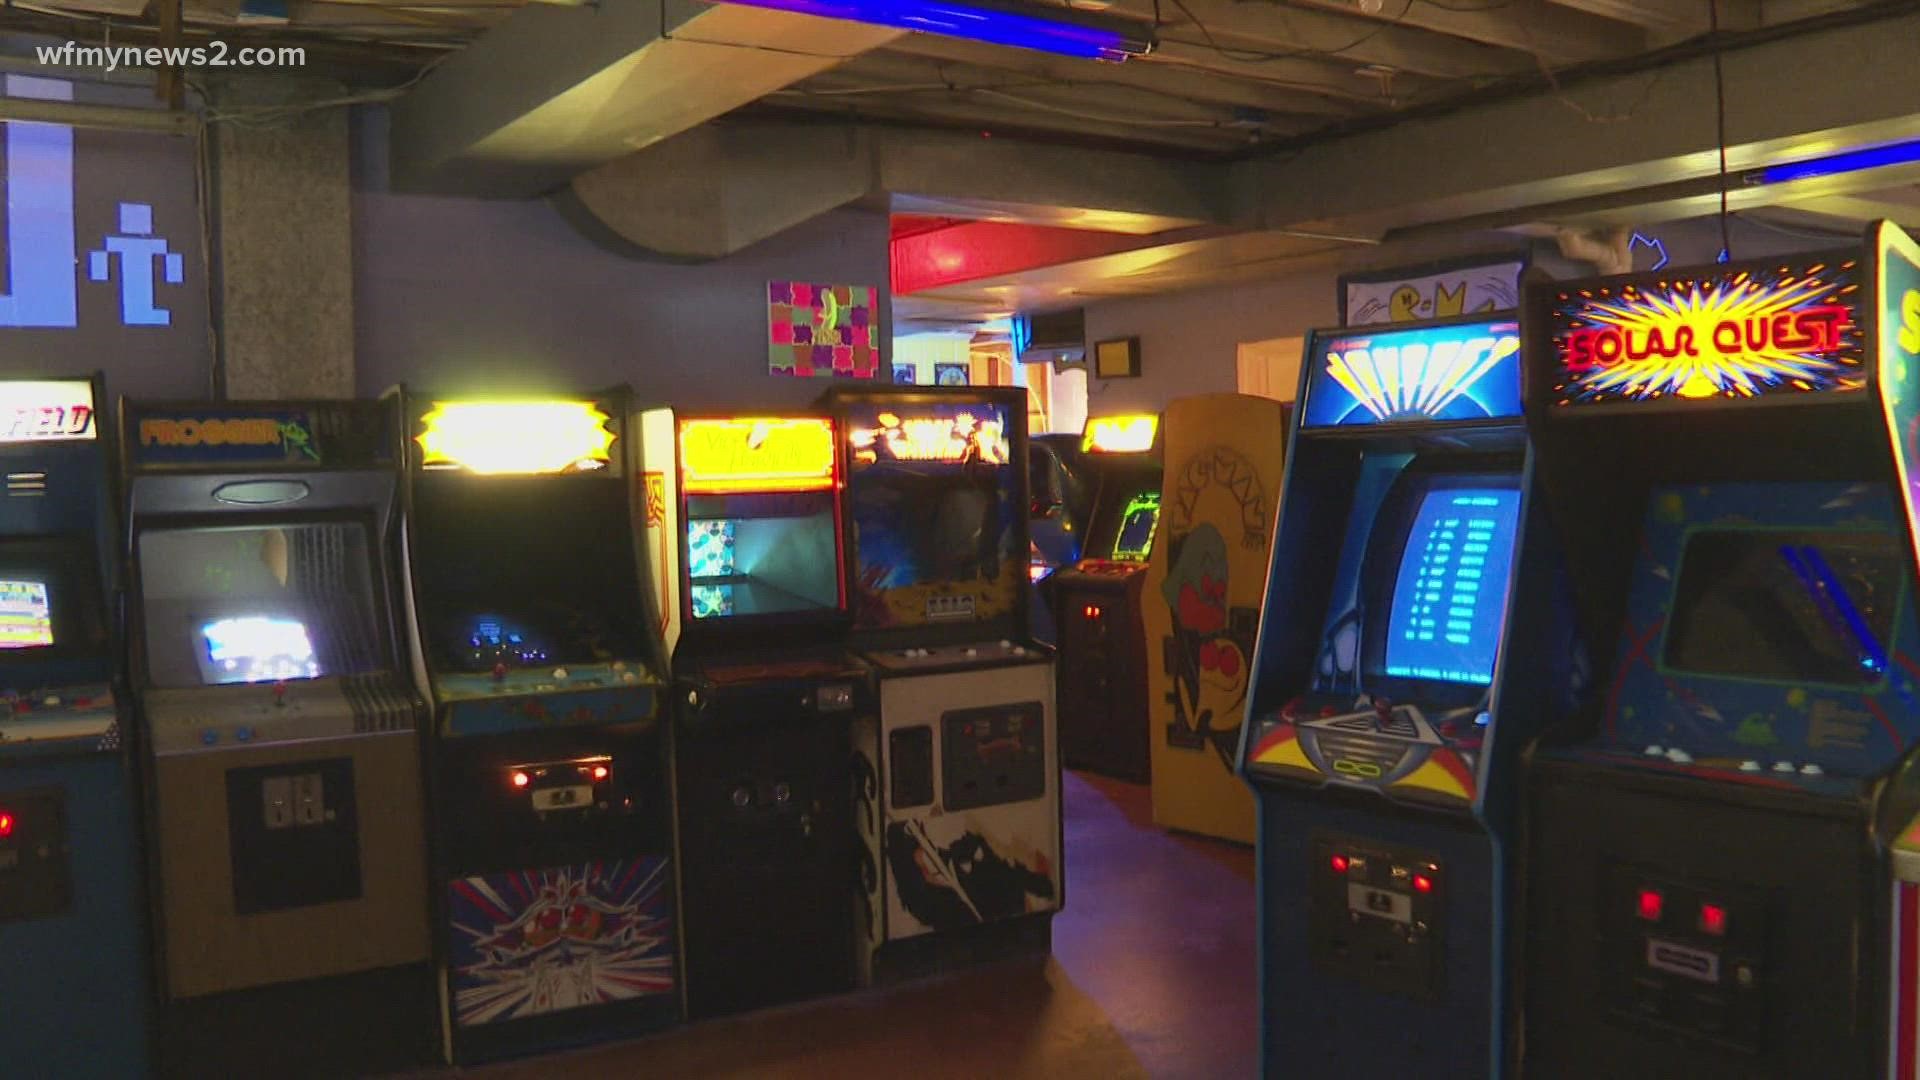 Scott Leftwich and his wife decided to give Airbnb a try, and incorporate his video game arcade collection in the mix.